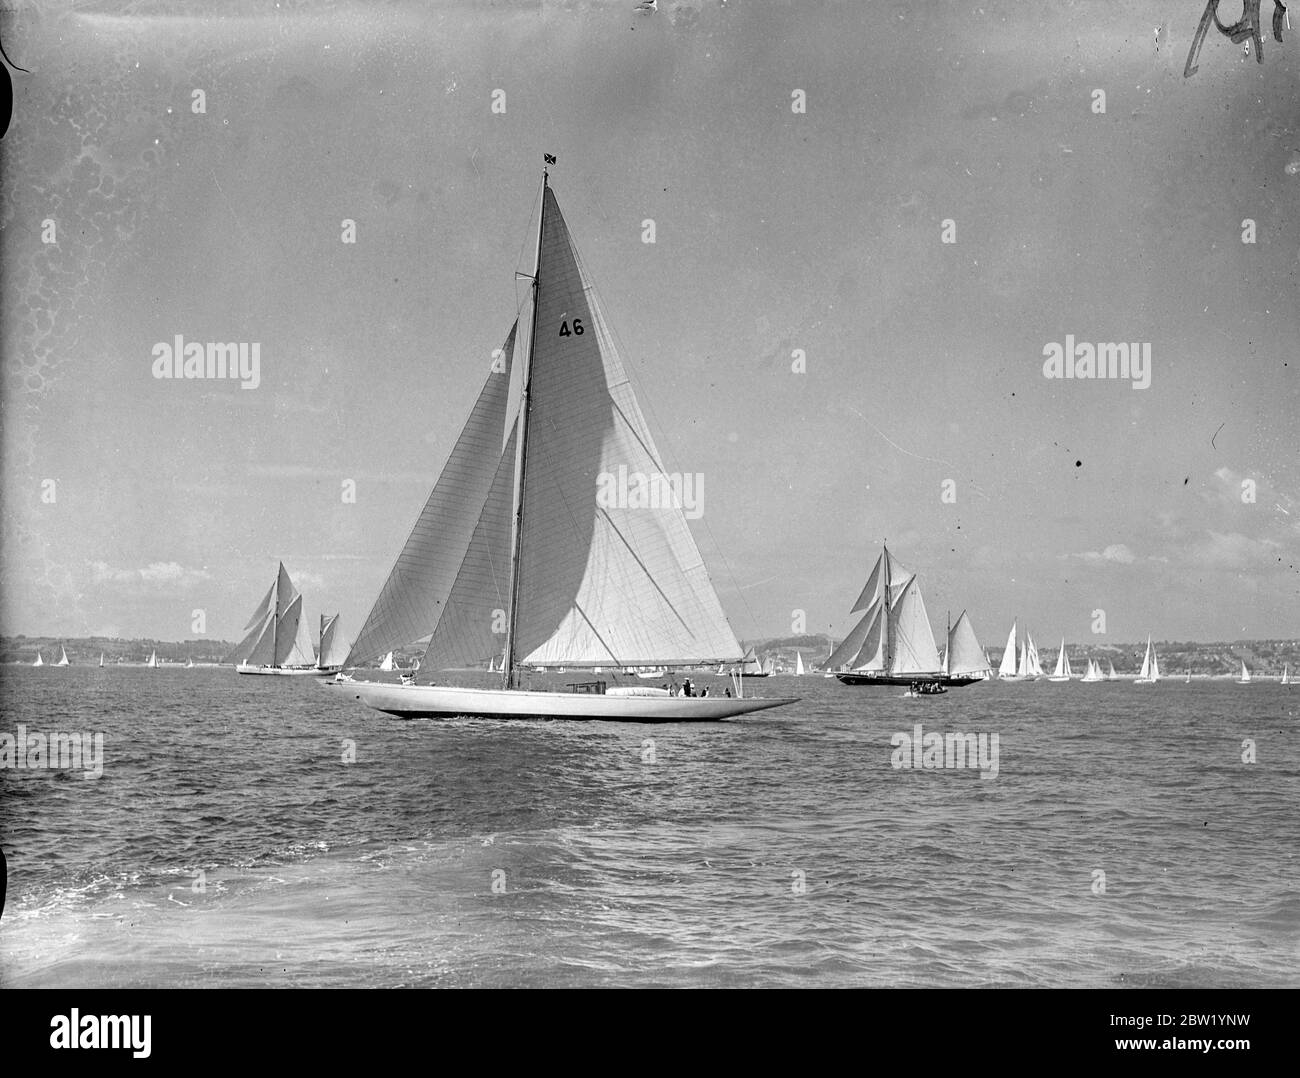 Race for big cruisers at Torquay coronationa regatta. Three hundred and twelve yachts, including one entered by Crown prince Olaf of Norway, are taking part in the International Coronation regatta which has opened at Torquay. The asembly of craft is the biggest in the memory of Torbay Yachtsman. 19 June 1937 Stock Photo